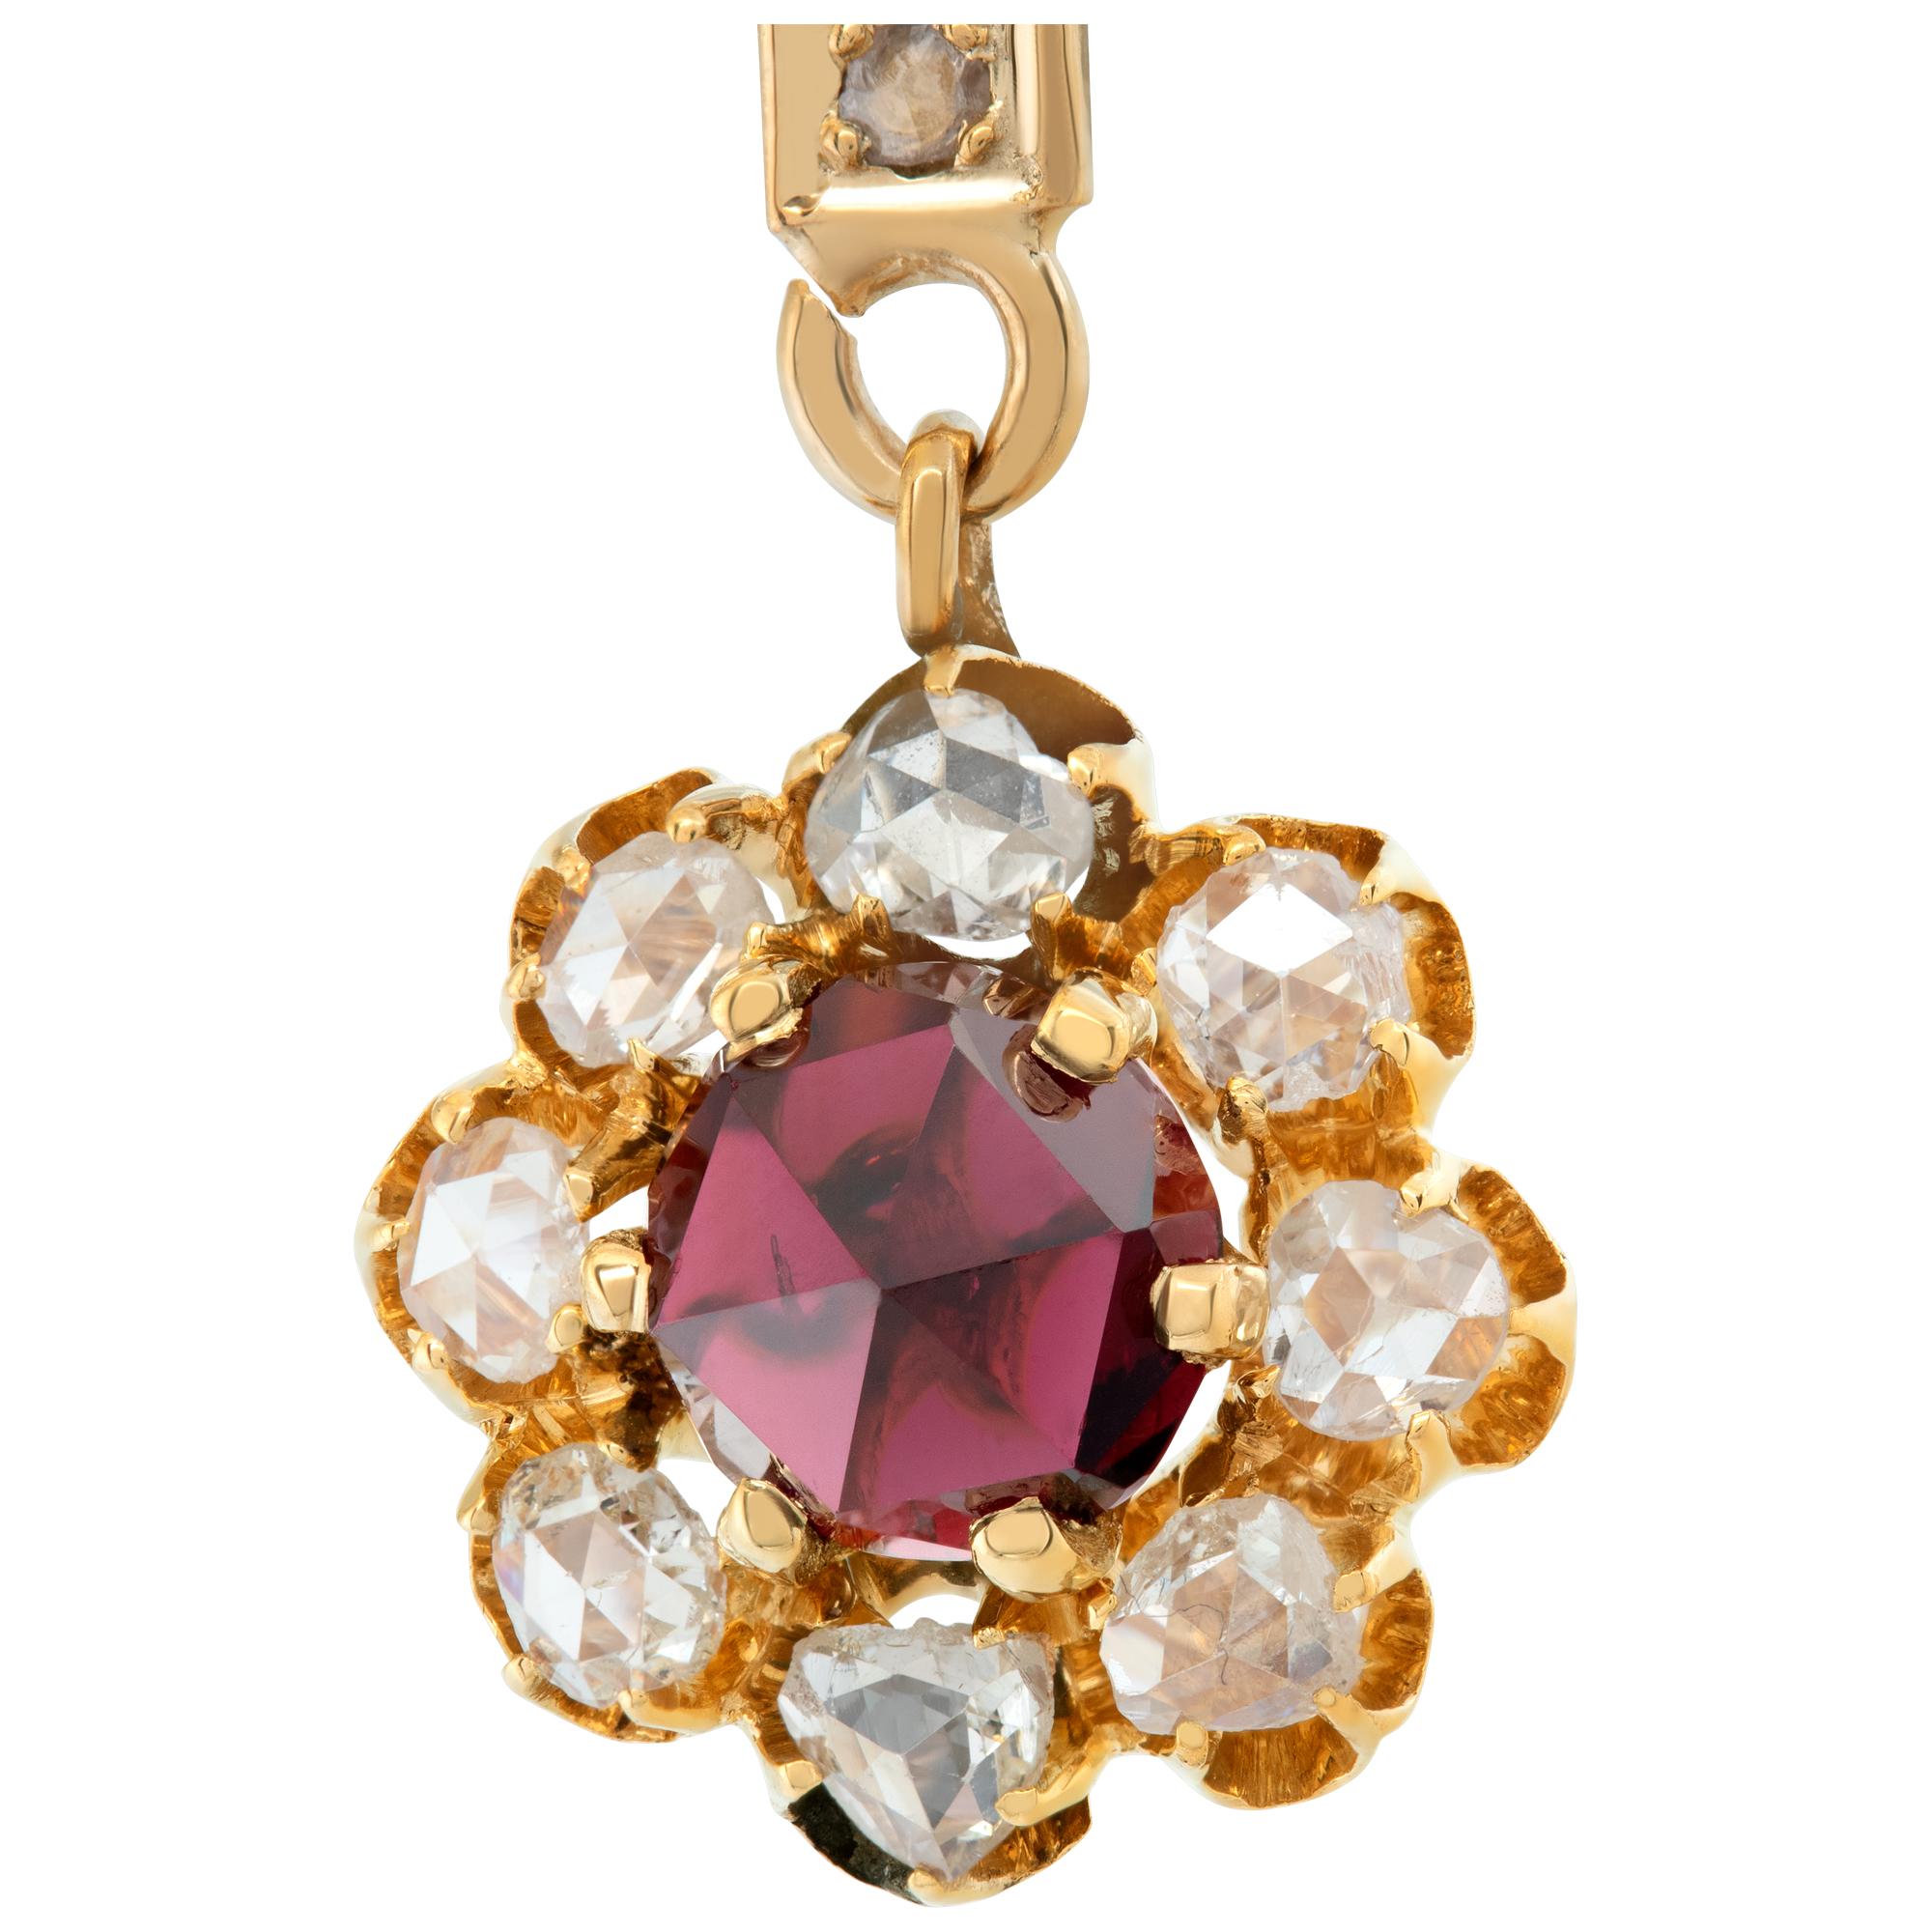 Antique 14k yellow gold floral briolette rose cut diamond earrings with approximately 2 carats in diamonds with approximately 2 carats in red garnet. Hanging length: 1.25 inches.
